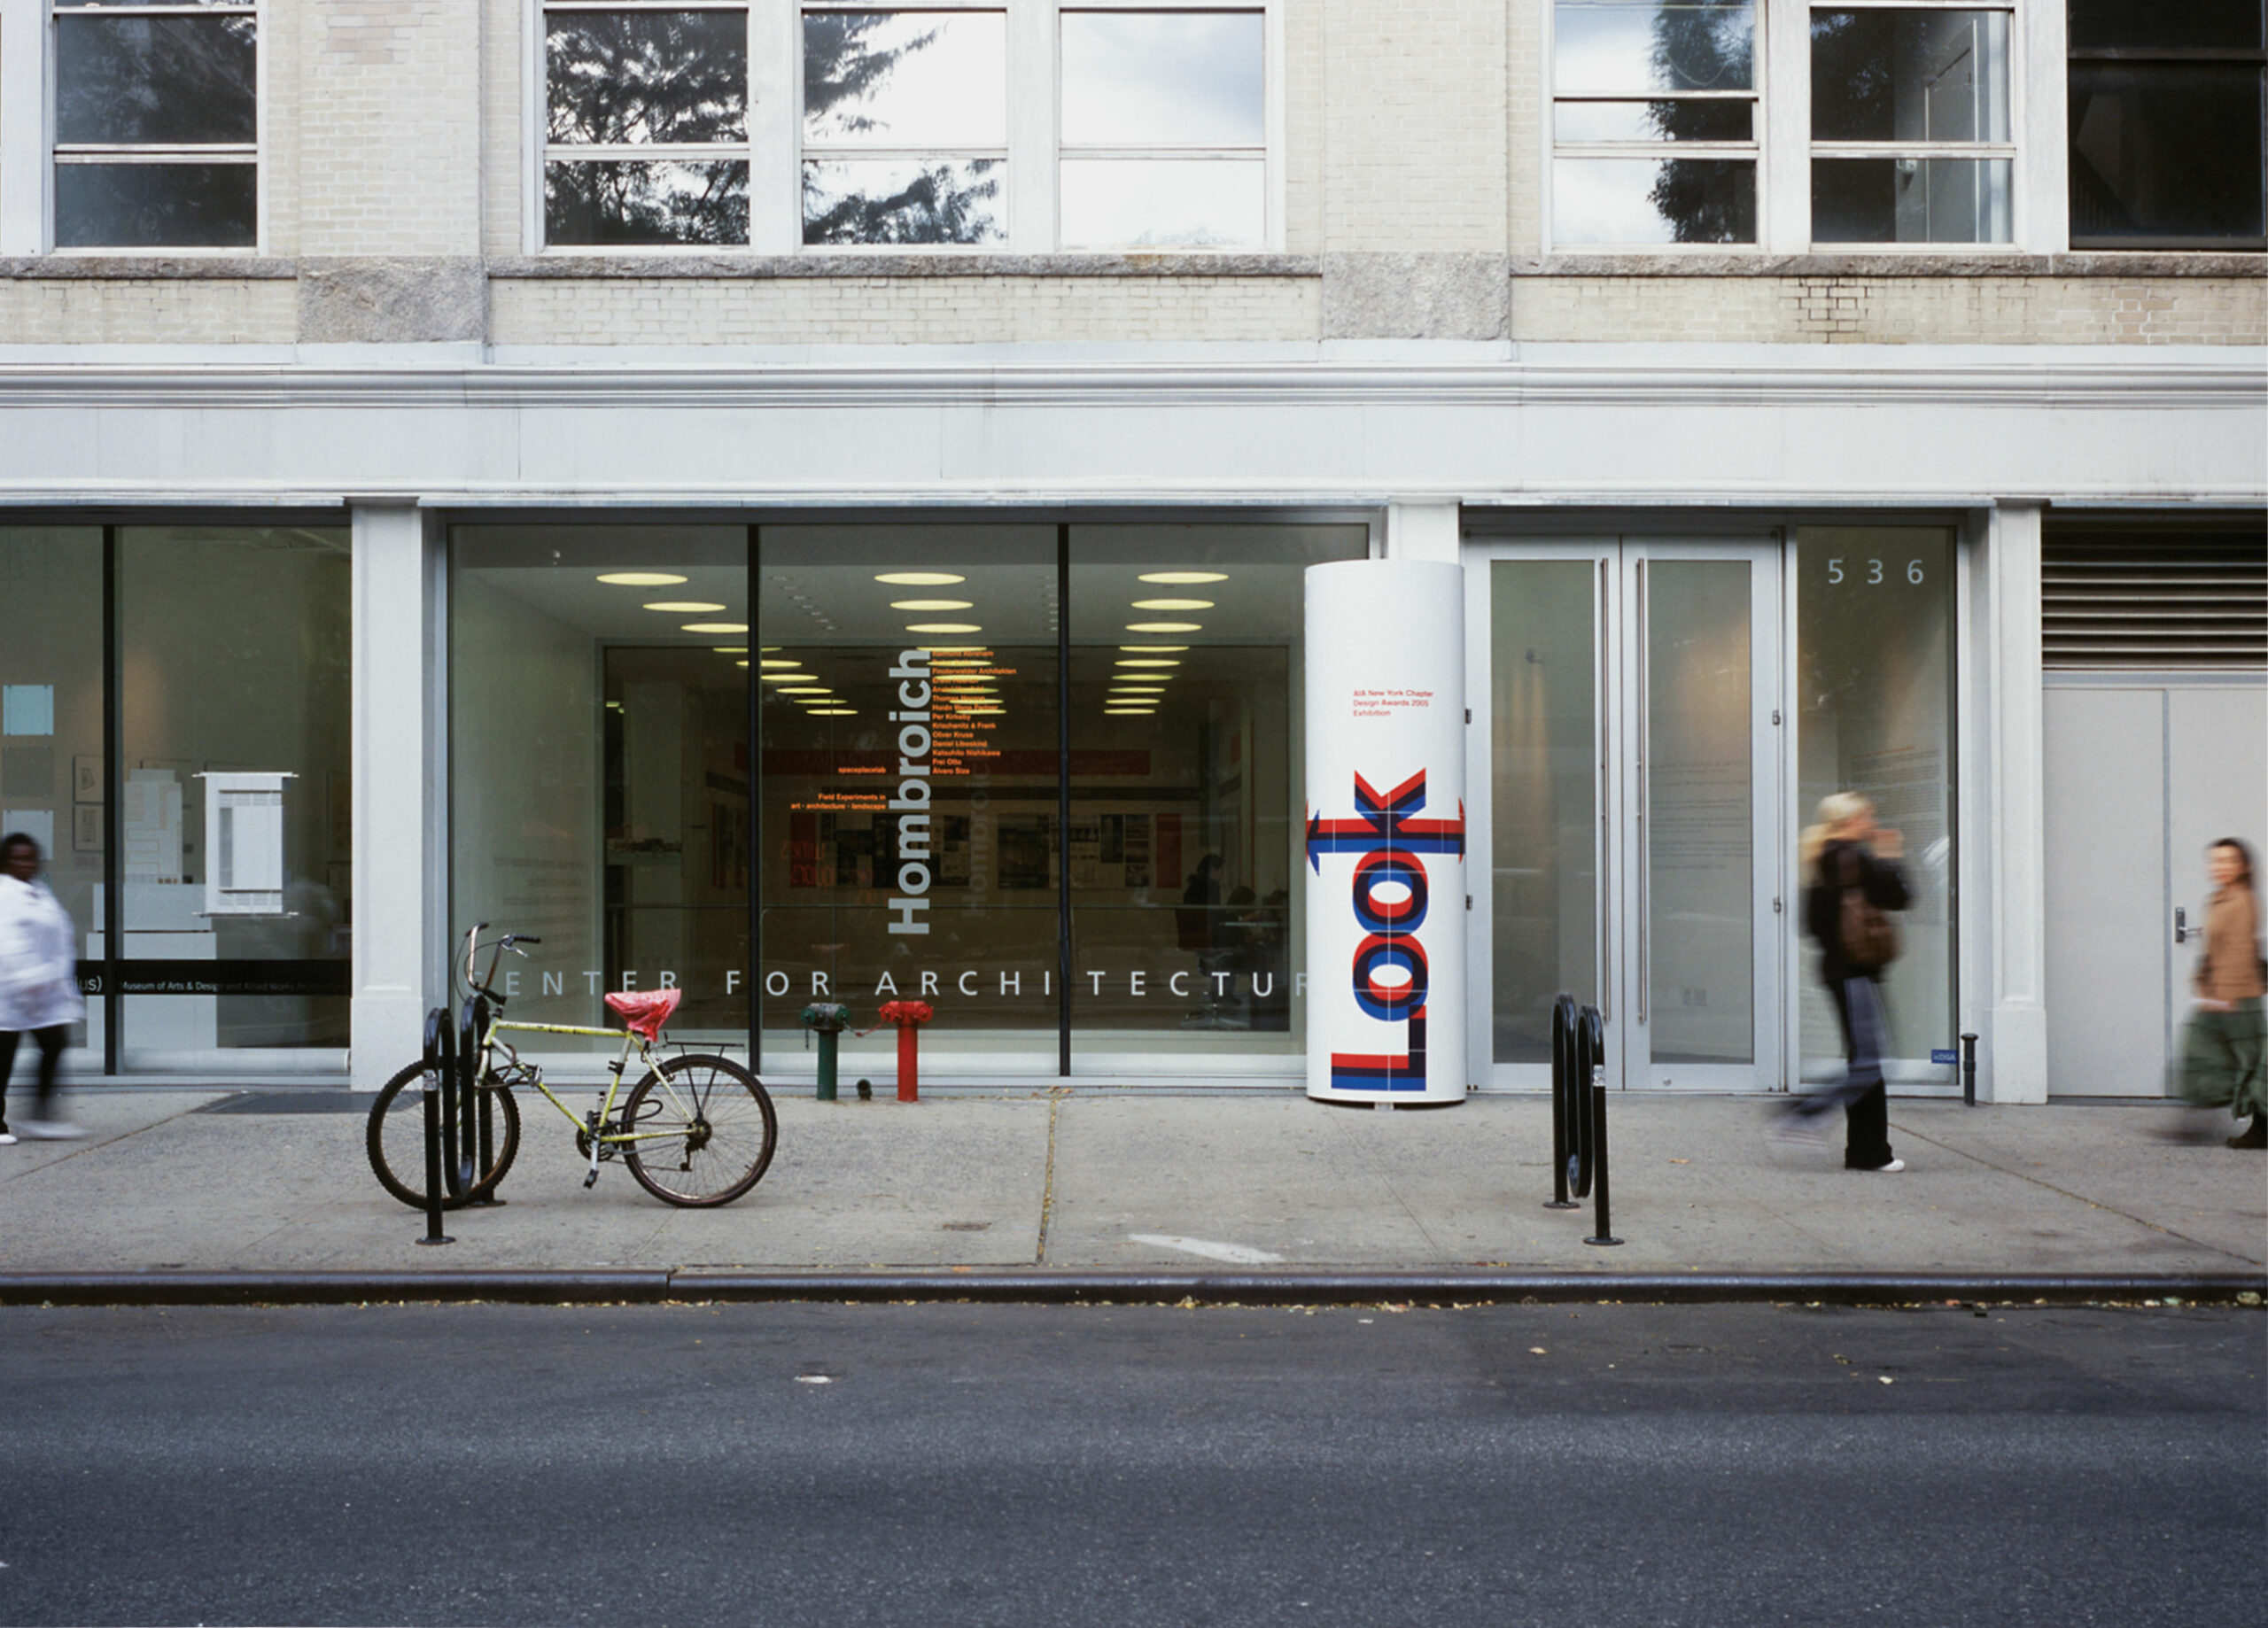 Exhibition design for American Institute of Architects New York. Exterior signage on cylindrical pillar.